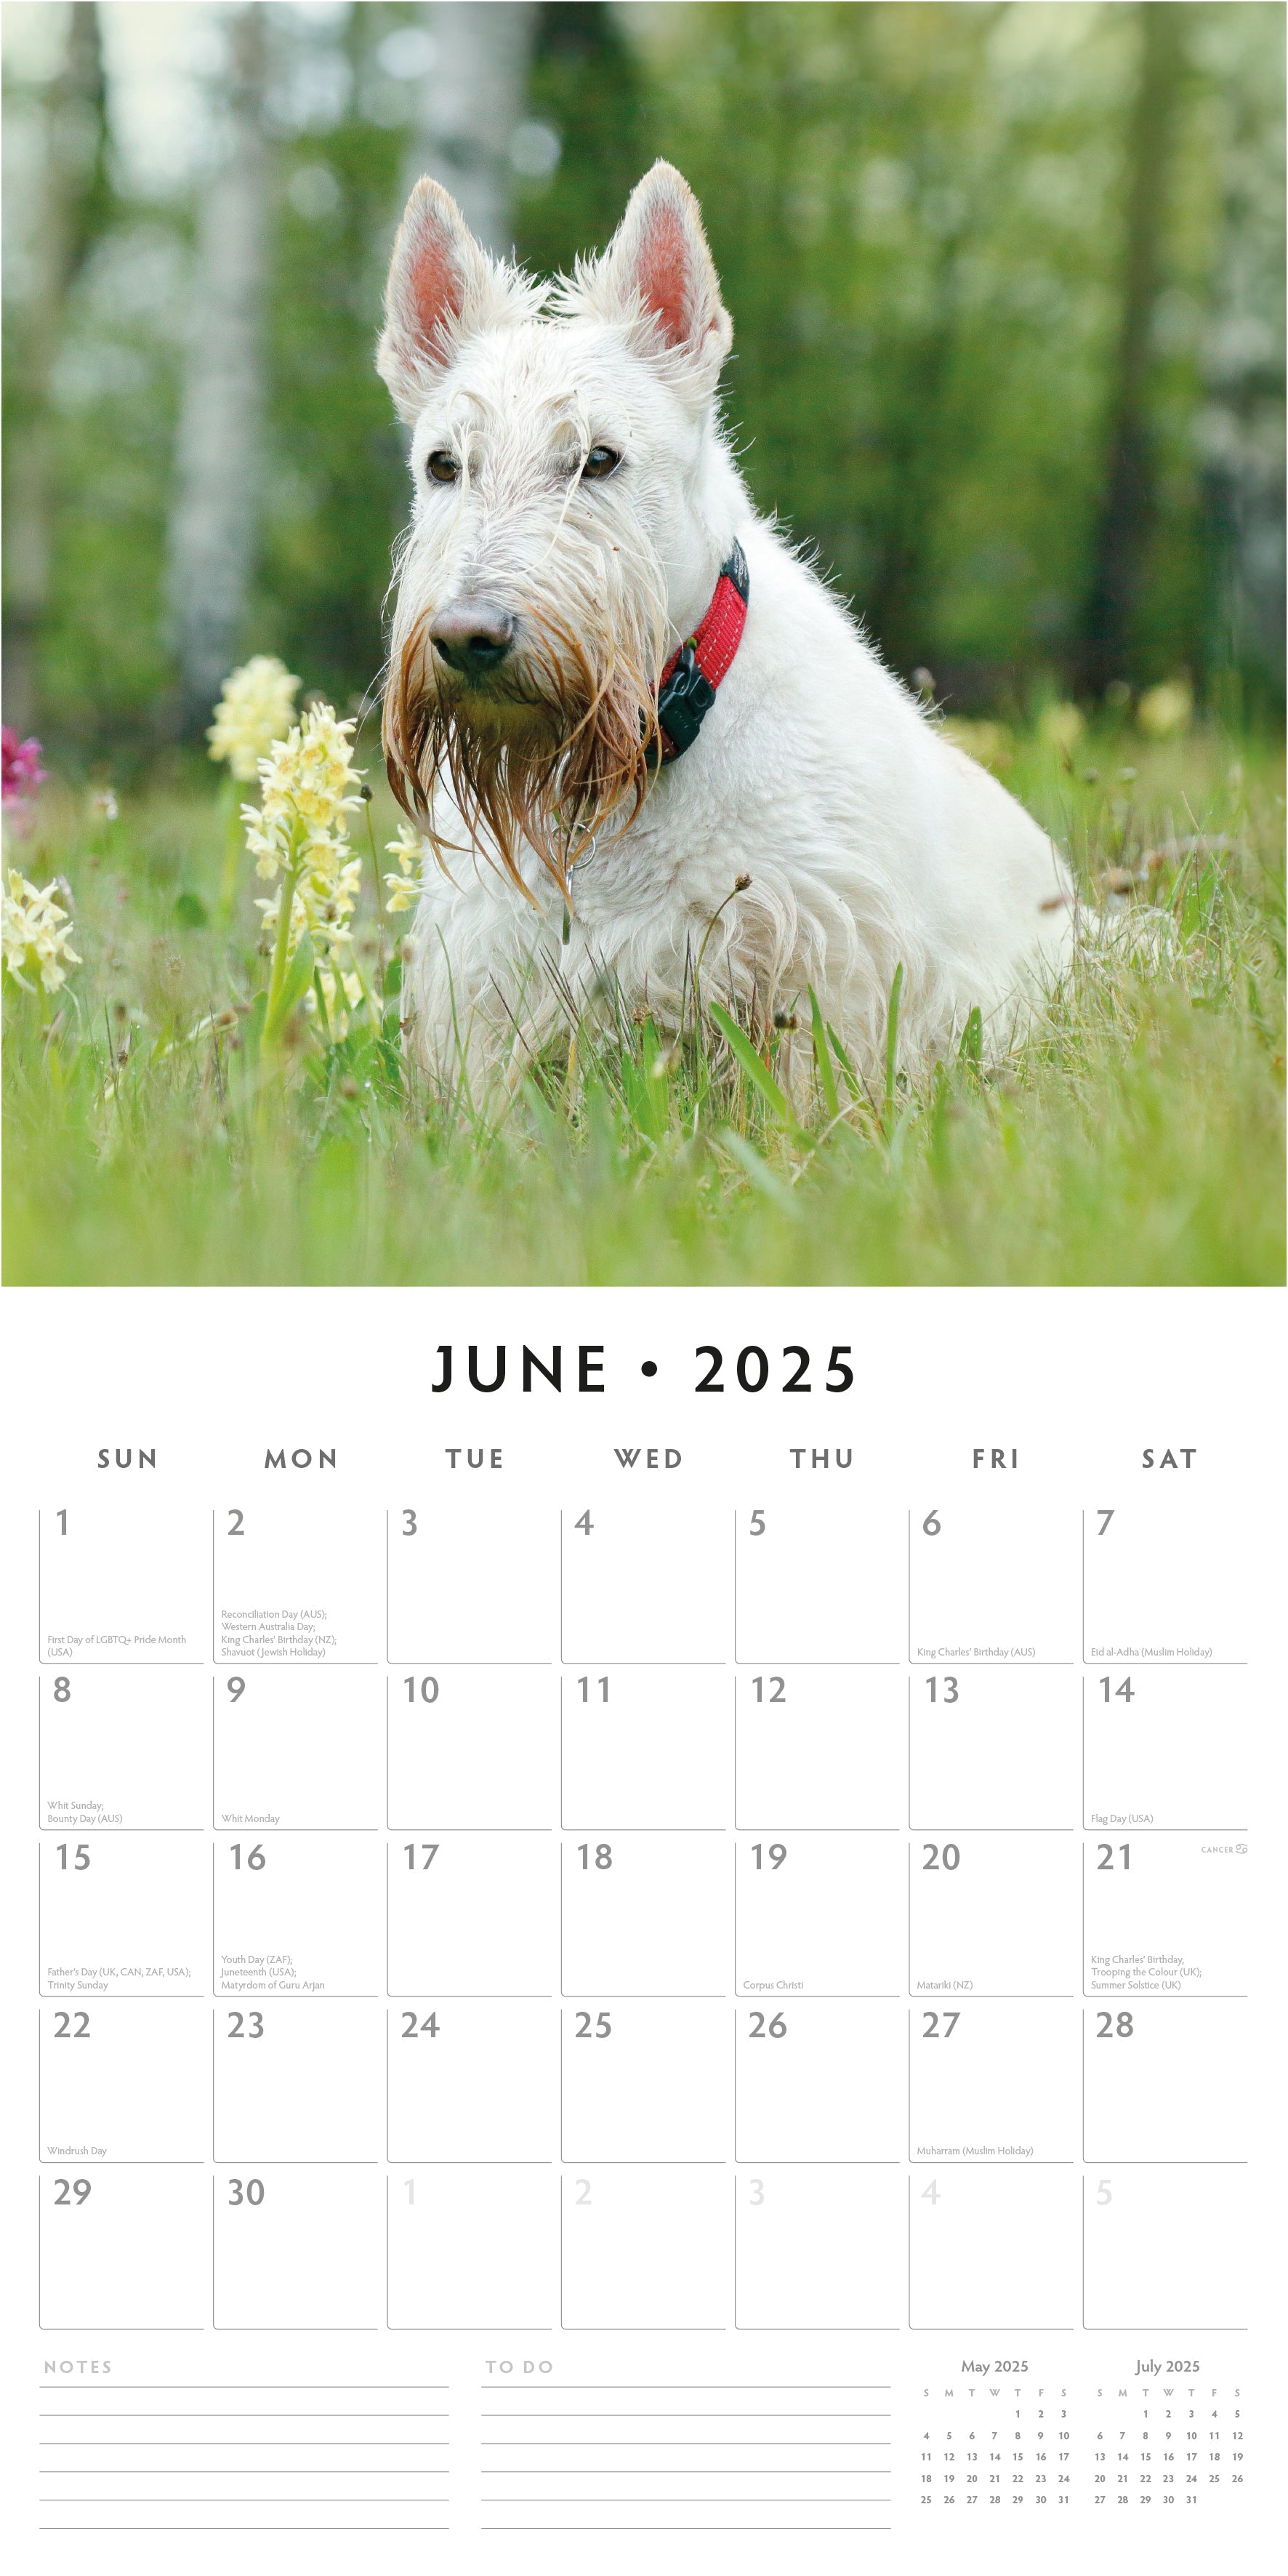 2025 Scottish Terriers - Square Wall Calendar